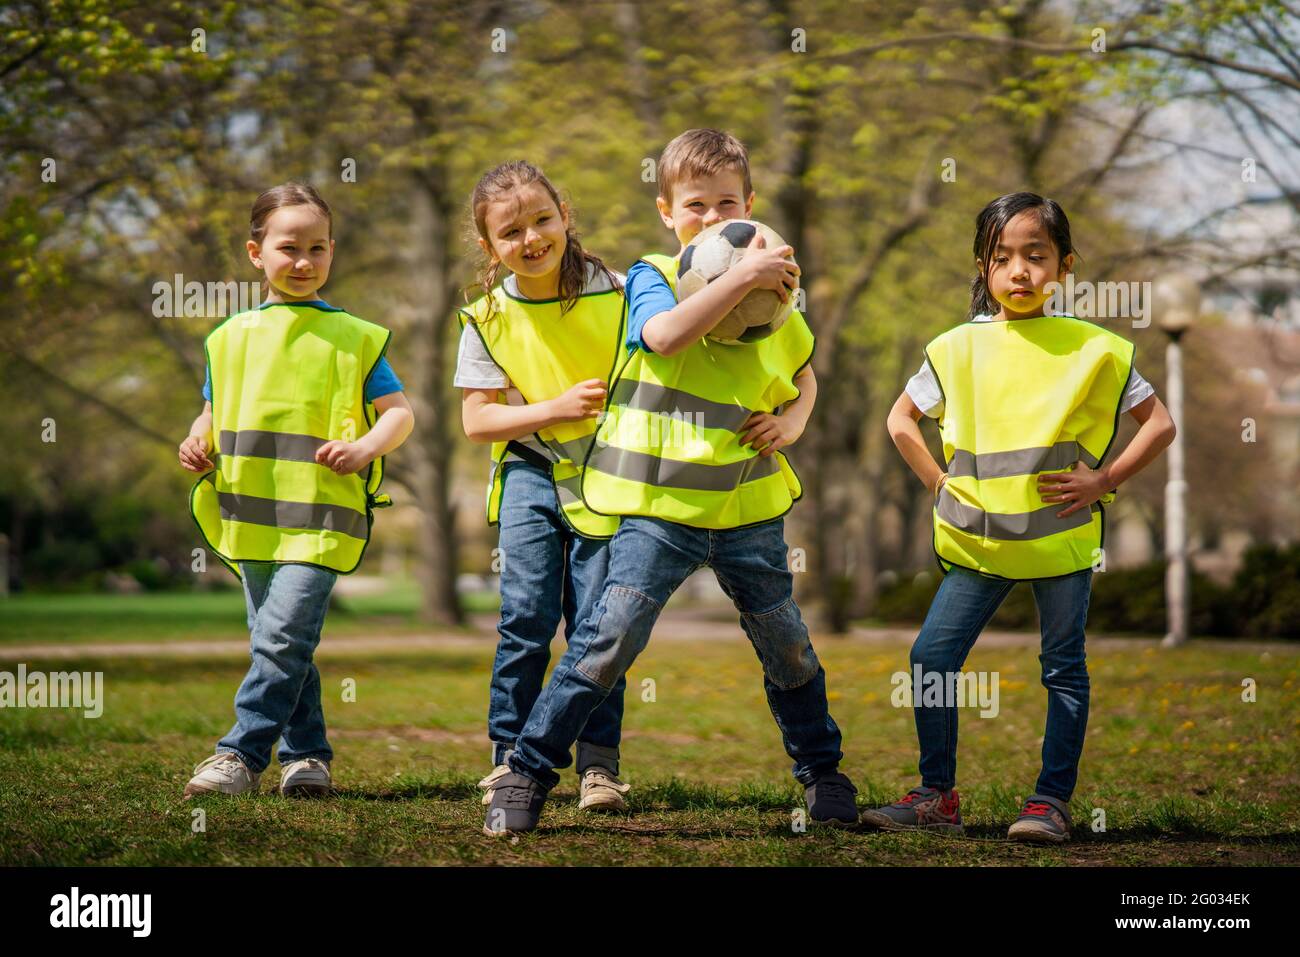 Small children with ball looking at camera outdoors in city park, learning group education concept. Stock Photo